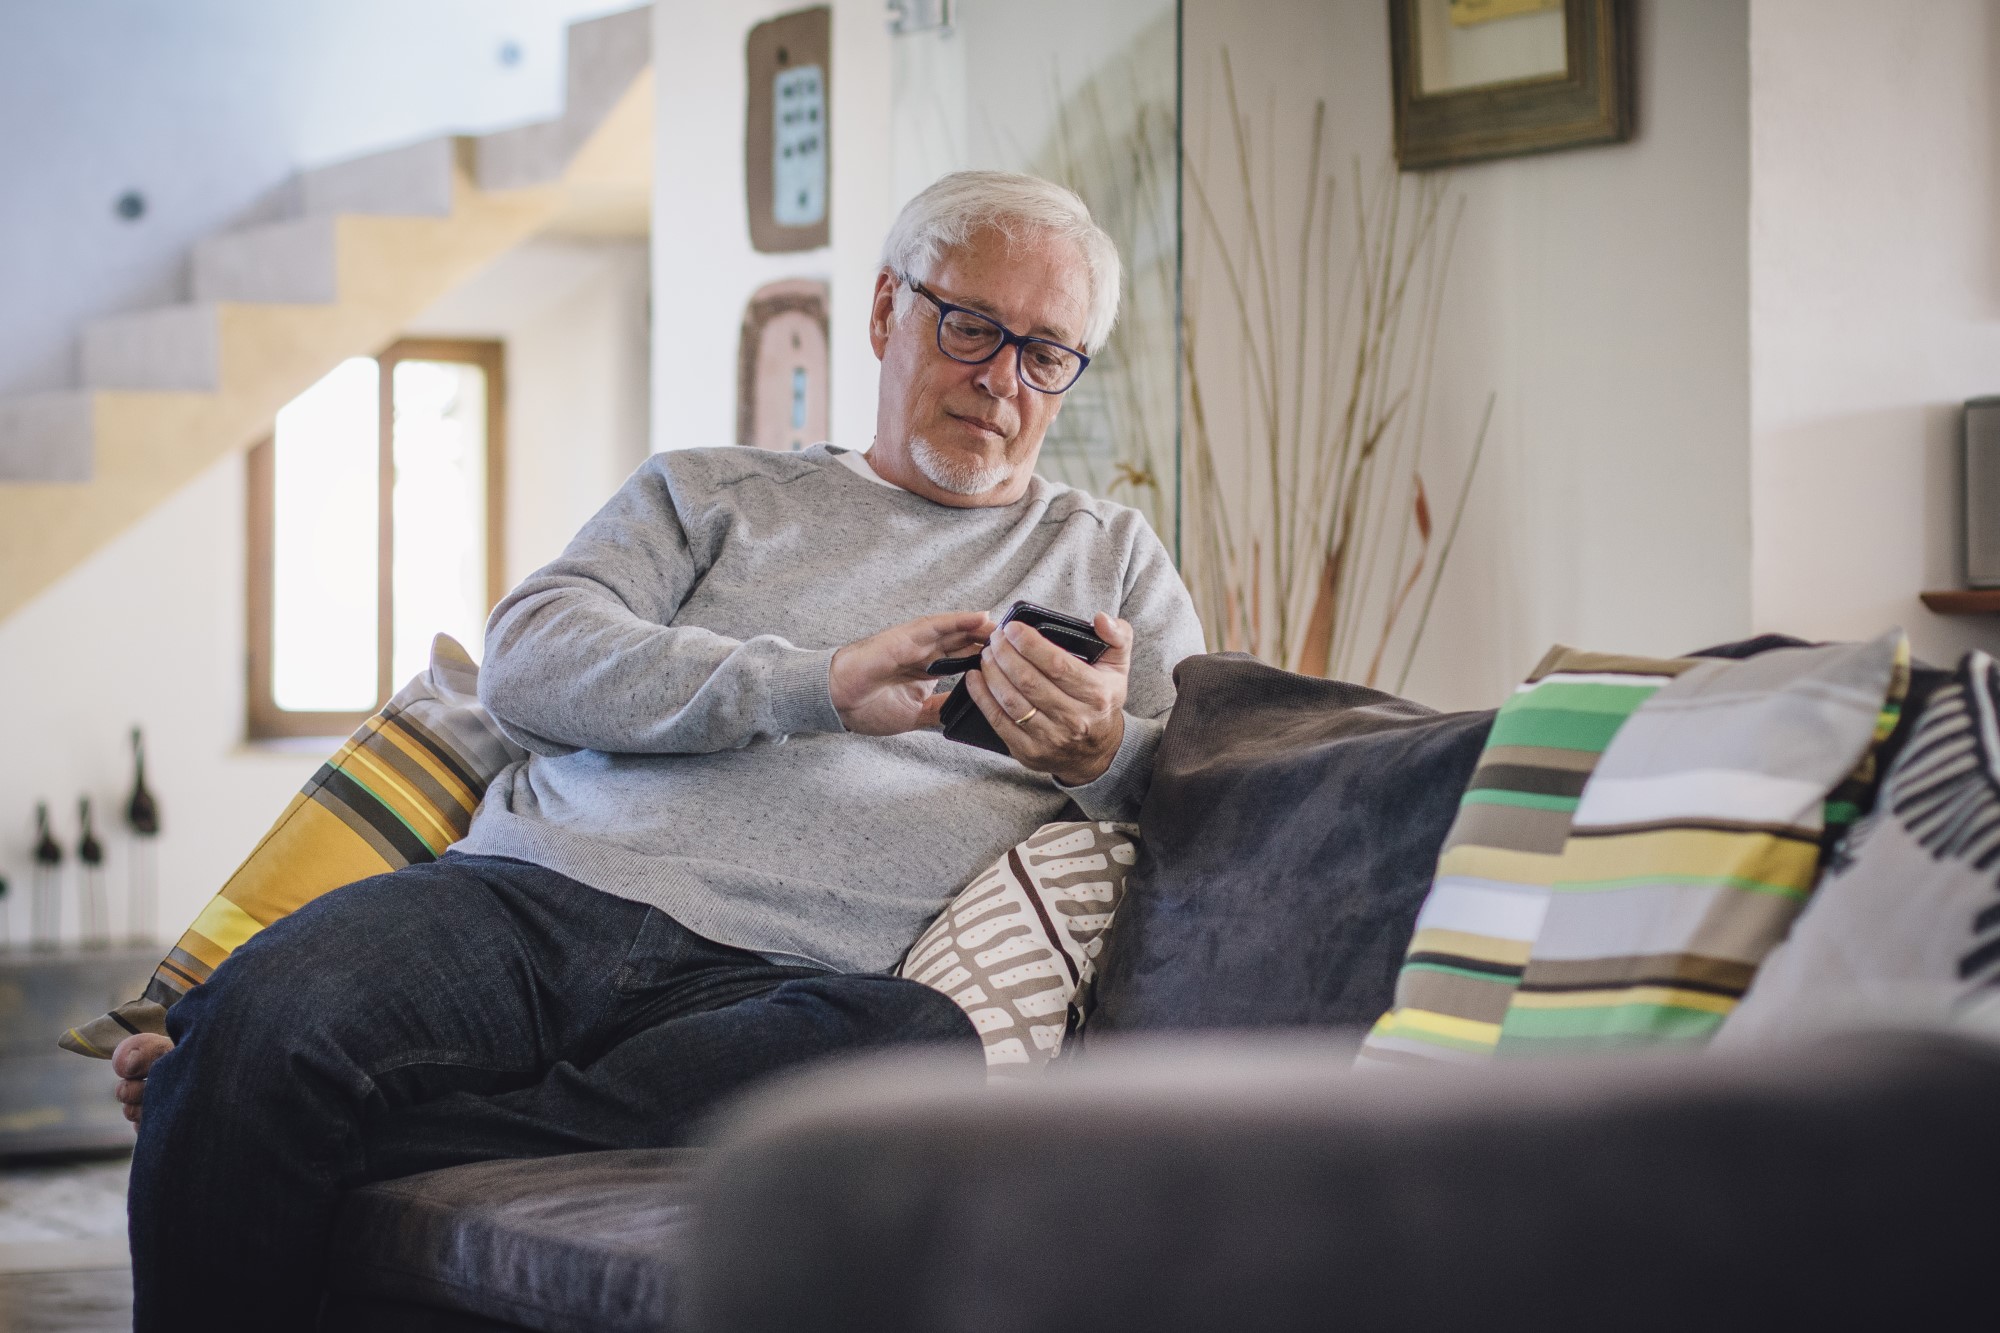 Older man sitting on couch looking at mobile phone